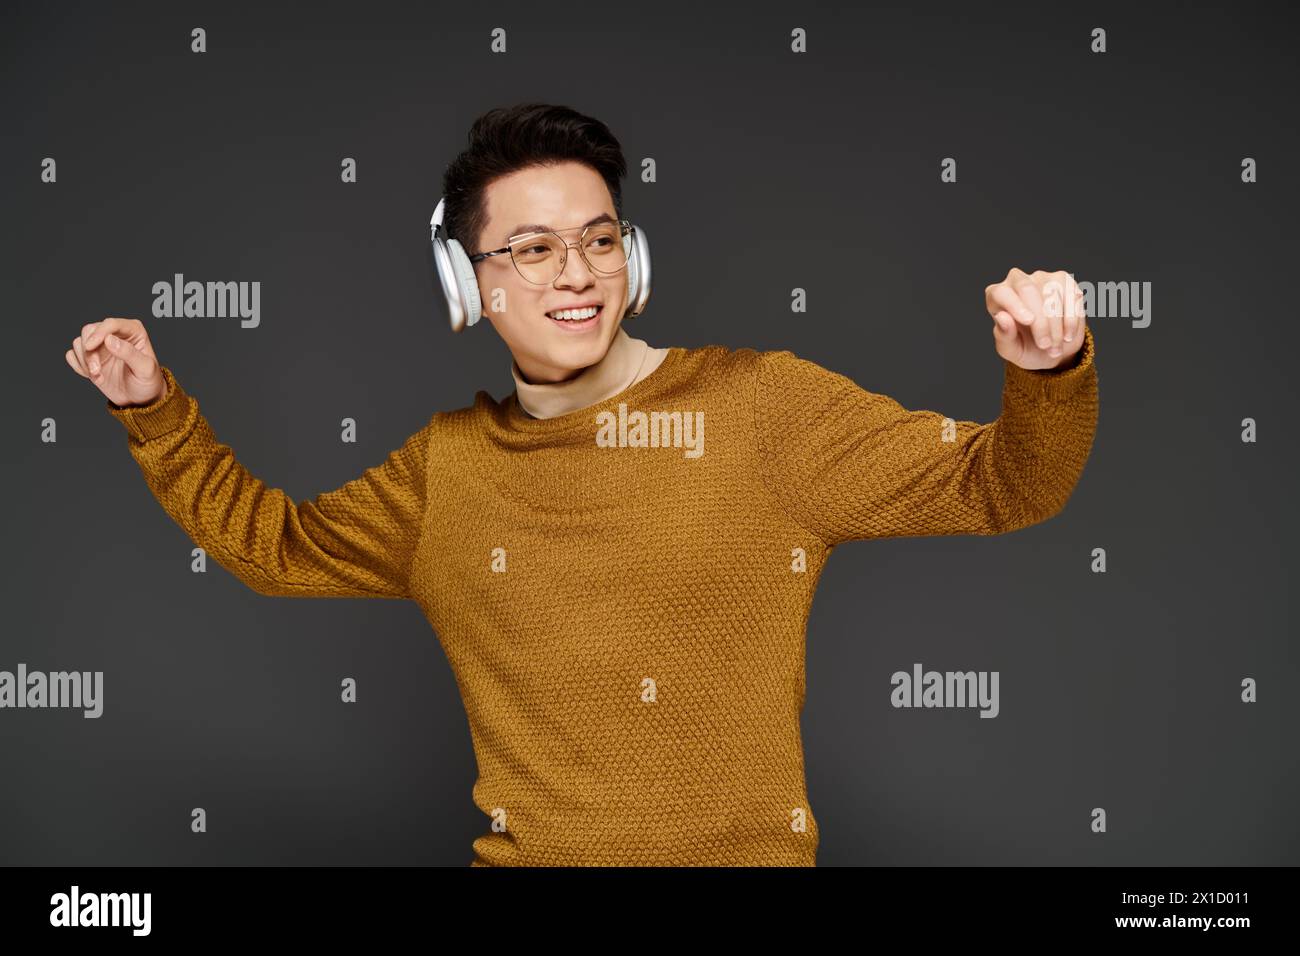 A fashionable young man energetically poses in a cozy sweater while wearing headphones, exuding a trendy and sophisticated vibe. Stock Photo